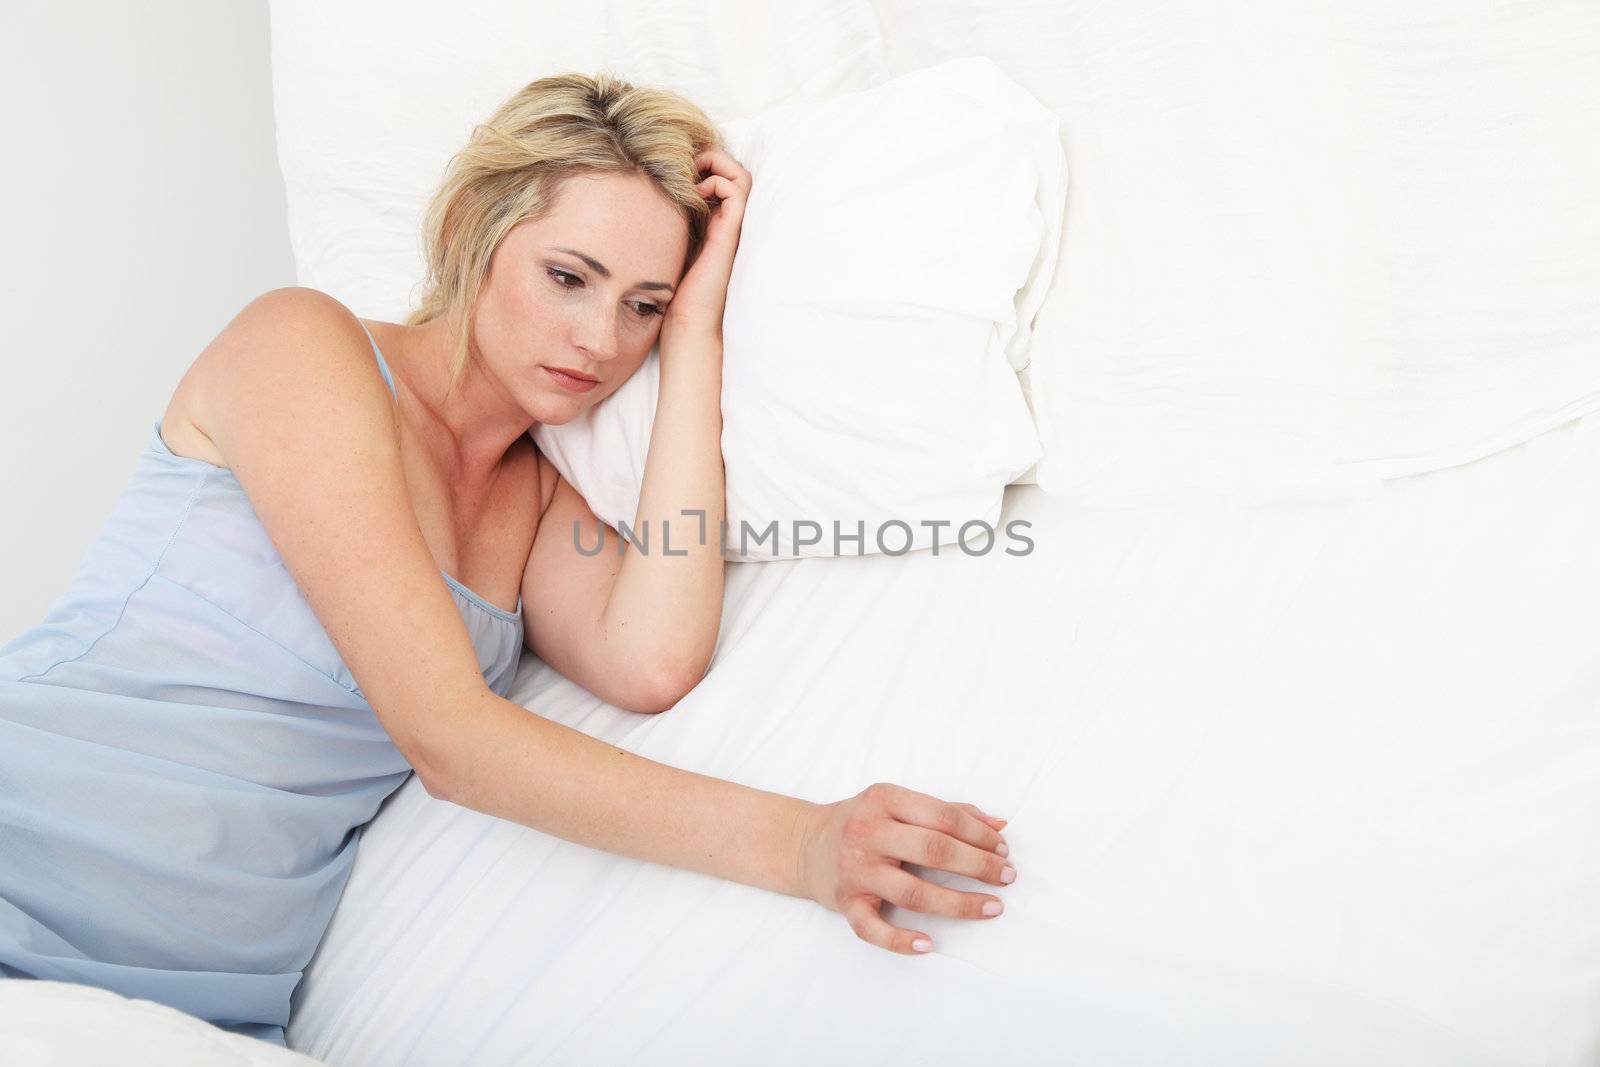 Sick depressed woman propped up on pillows  by Farina6000